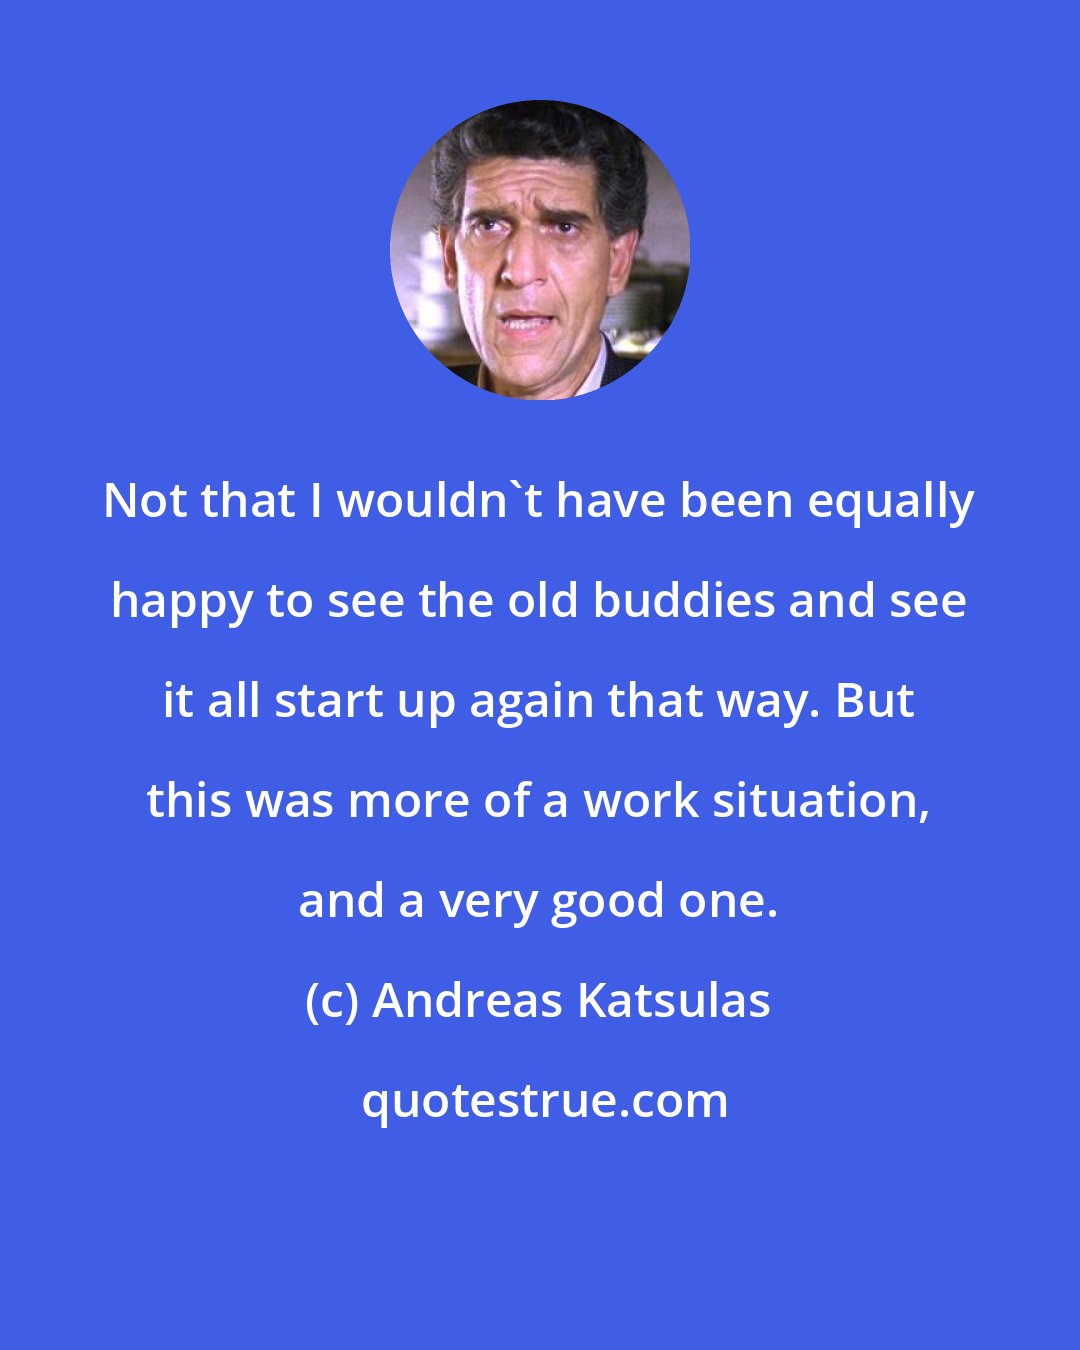 Andreas Katsulas: Not that I wouldn't have been equally happy to see the old buddies and see it all start up again that way. But this was more of a work situation, and a very good one.